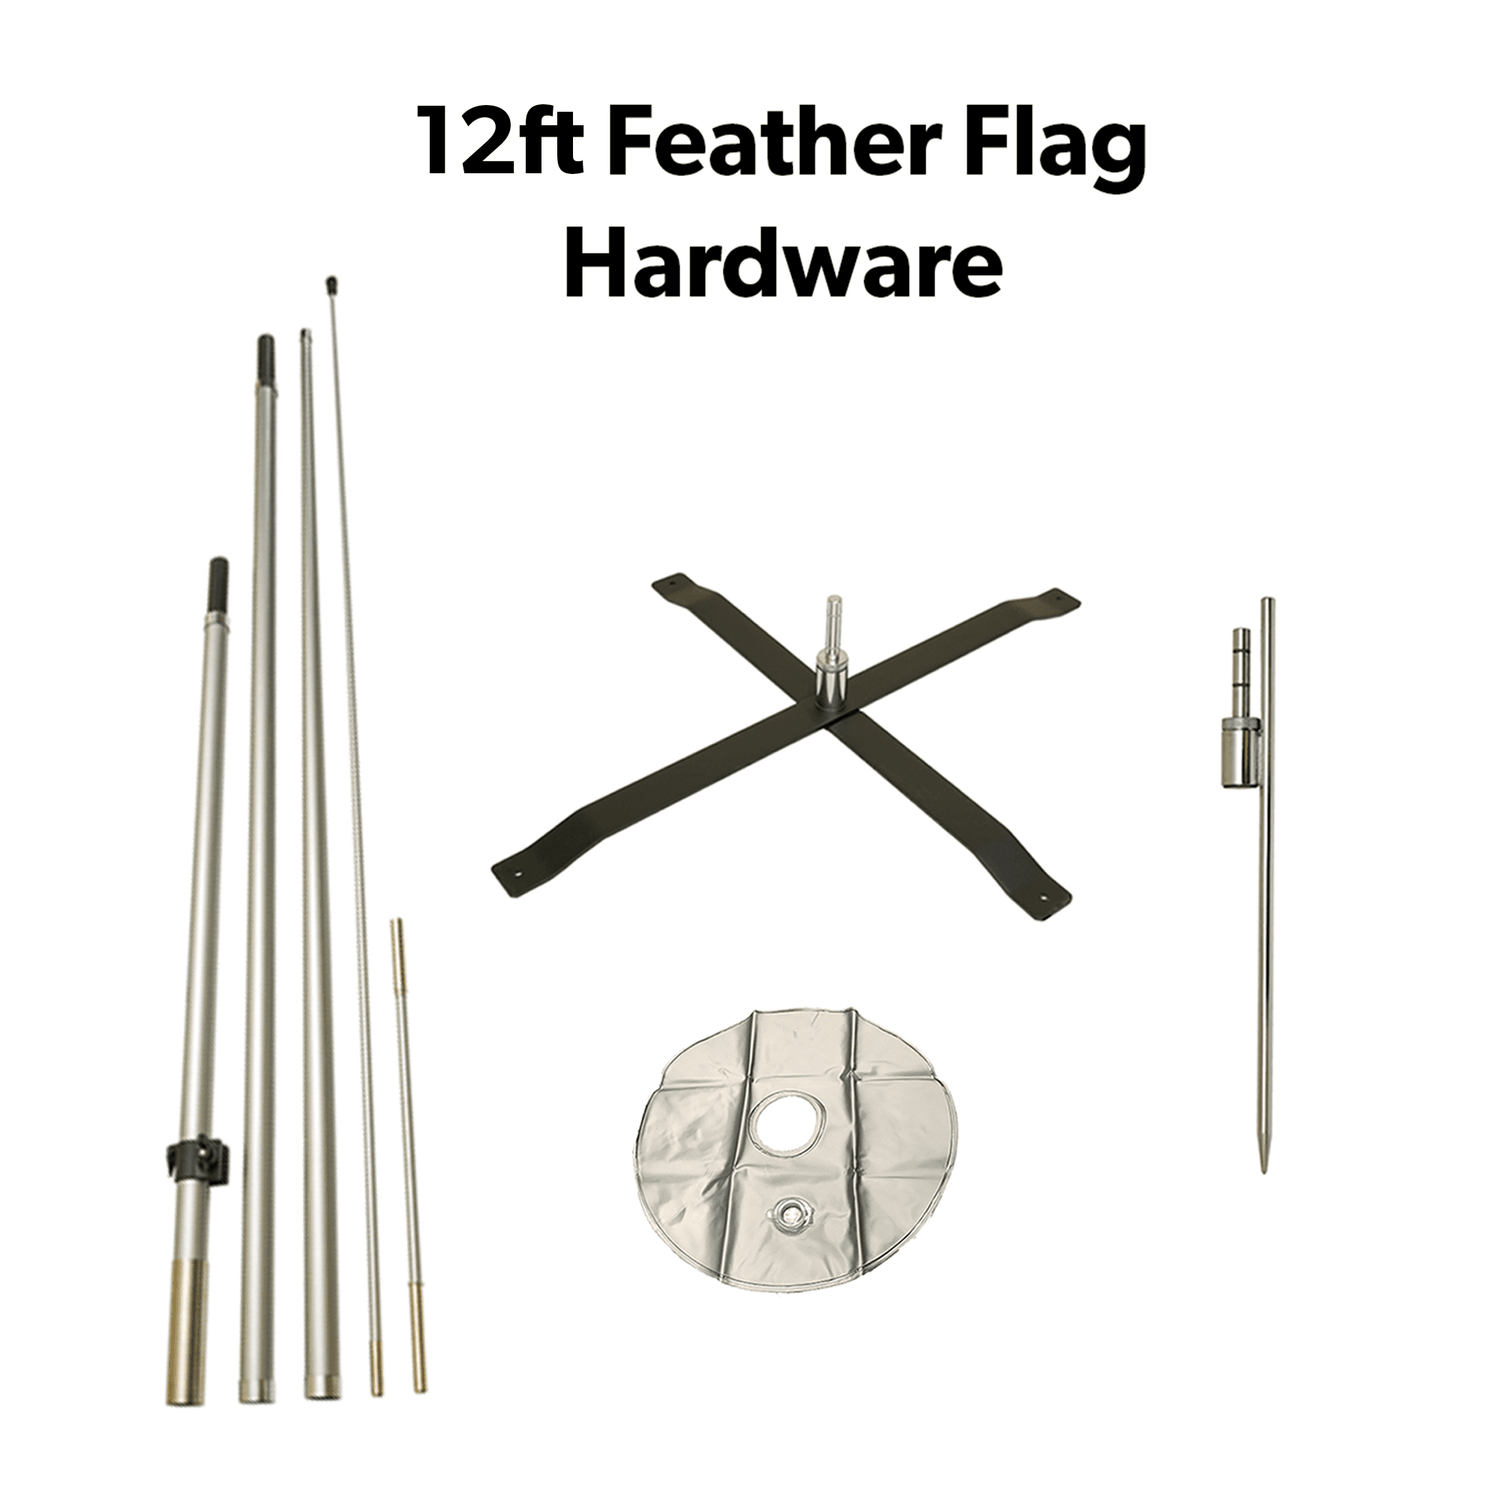 12ft Feather Flag Hardware 